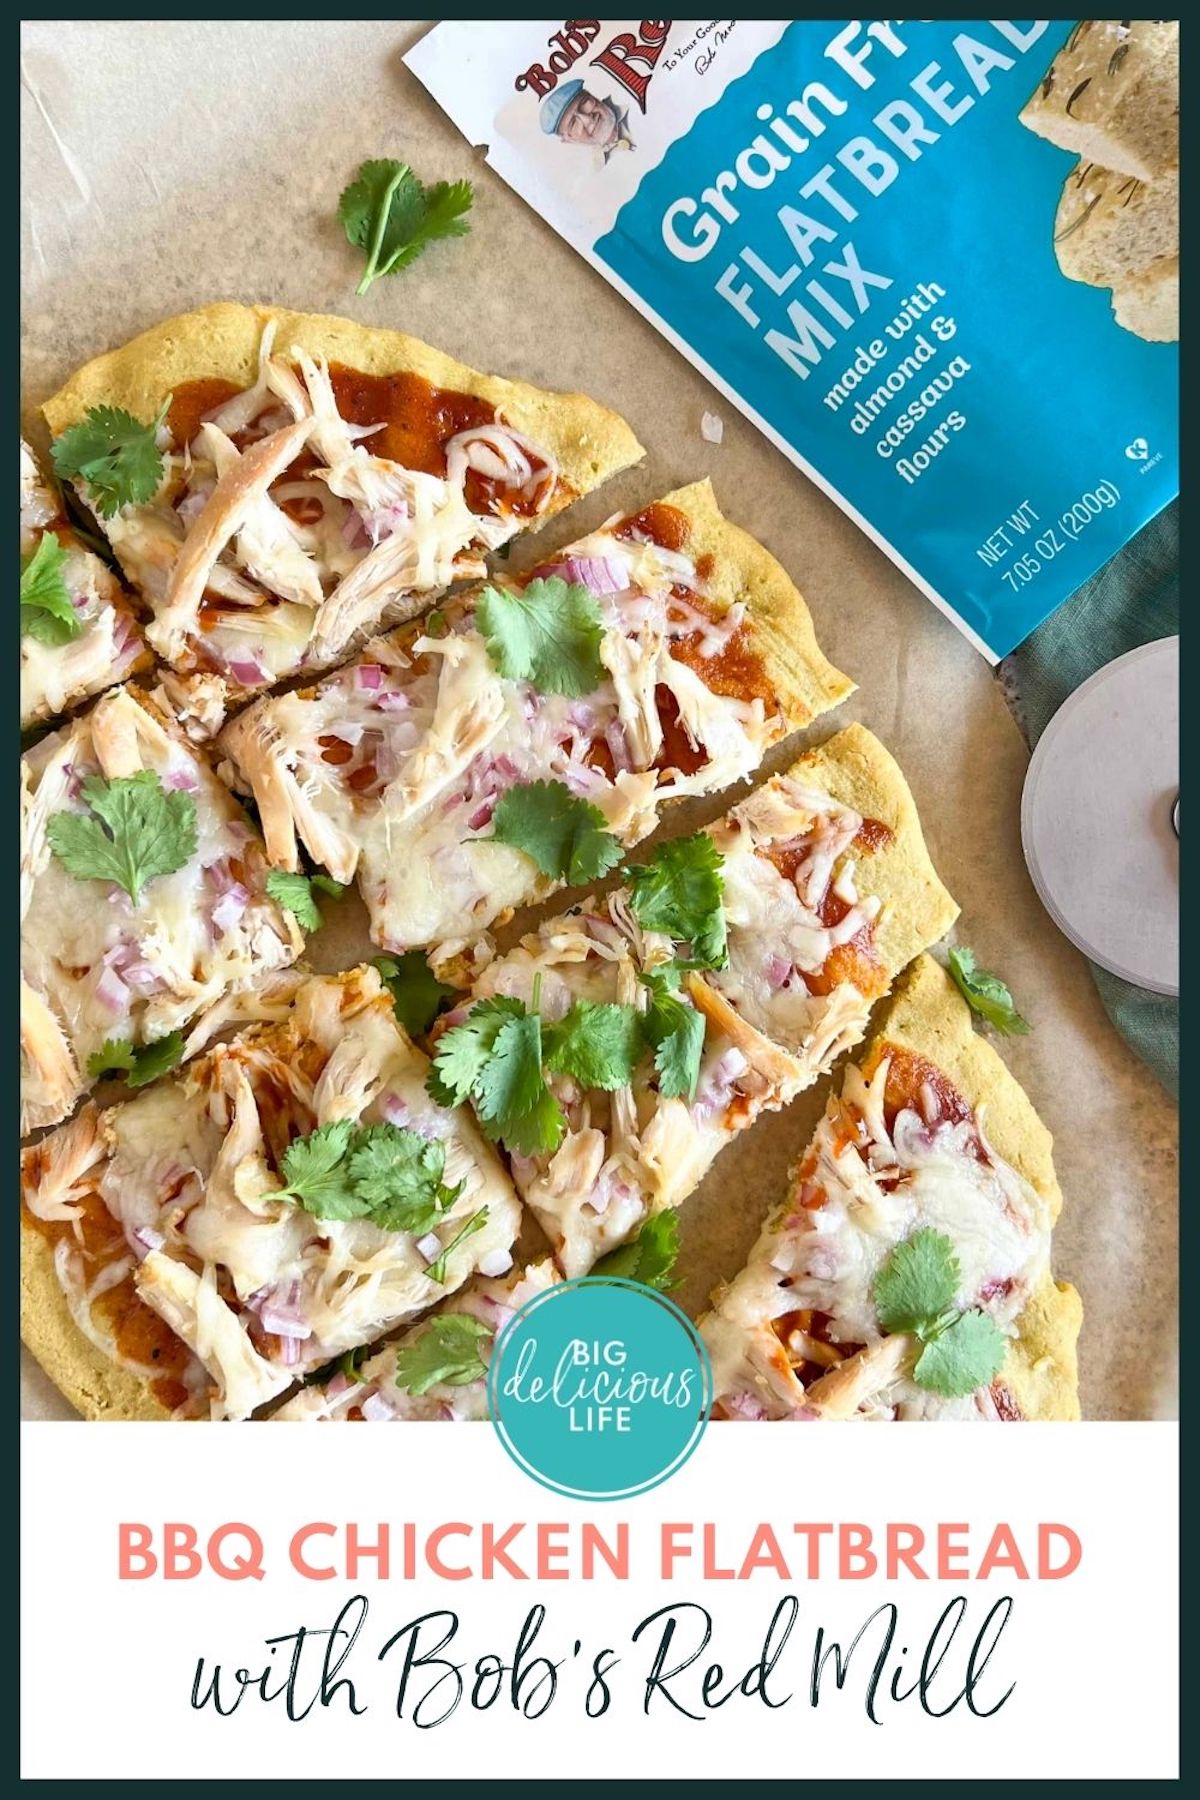 Branded Pinterest template with BBQ Chicken Flatbread and a bag of Bob's Red Mill Grain Free flatbread mix and a pizza cutter.